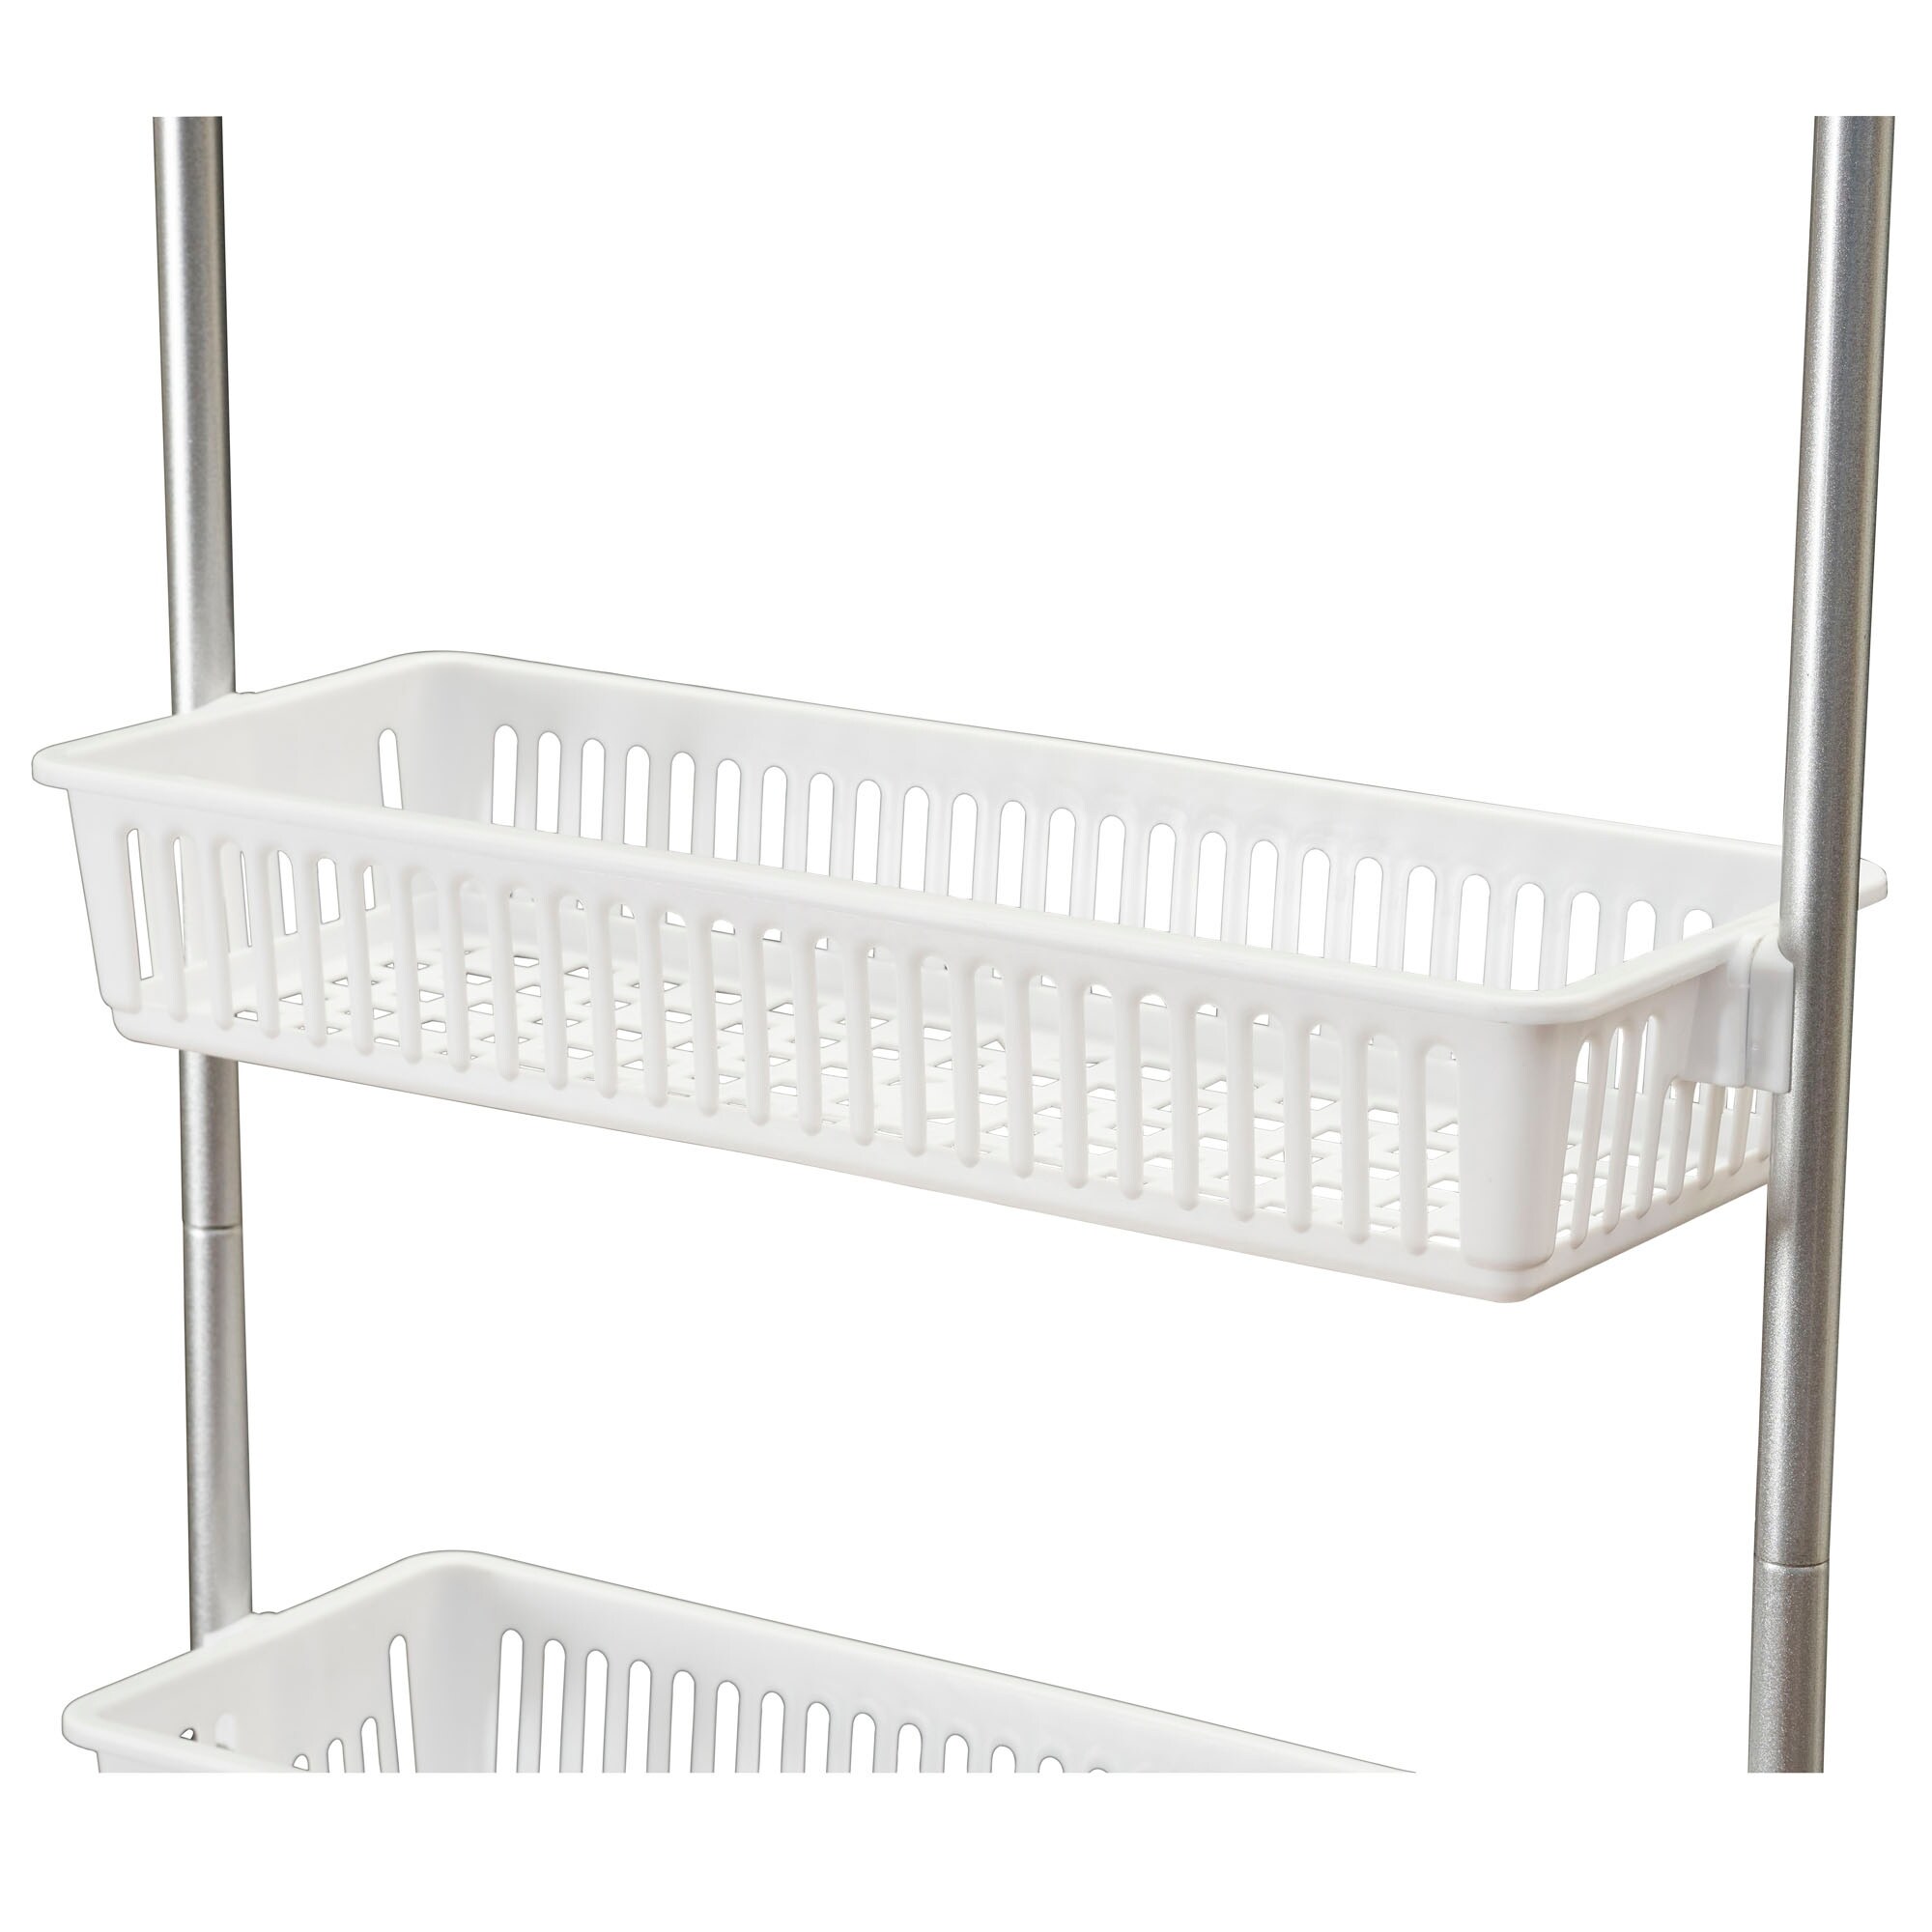 https://ak1.ostkcdn.com/images/products/is/images/direct/74c86f4017d4ca1a8e145b9f10d569b43aaf27e2/Household-Essentials-6-Basket-Over-the-Door-Organizer%2C-White.jpg